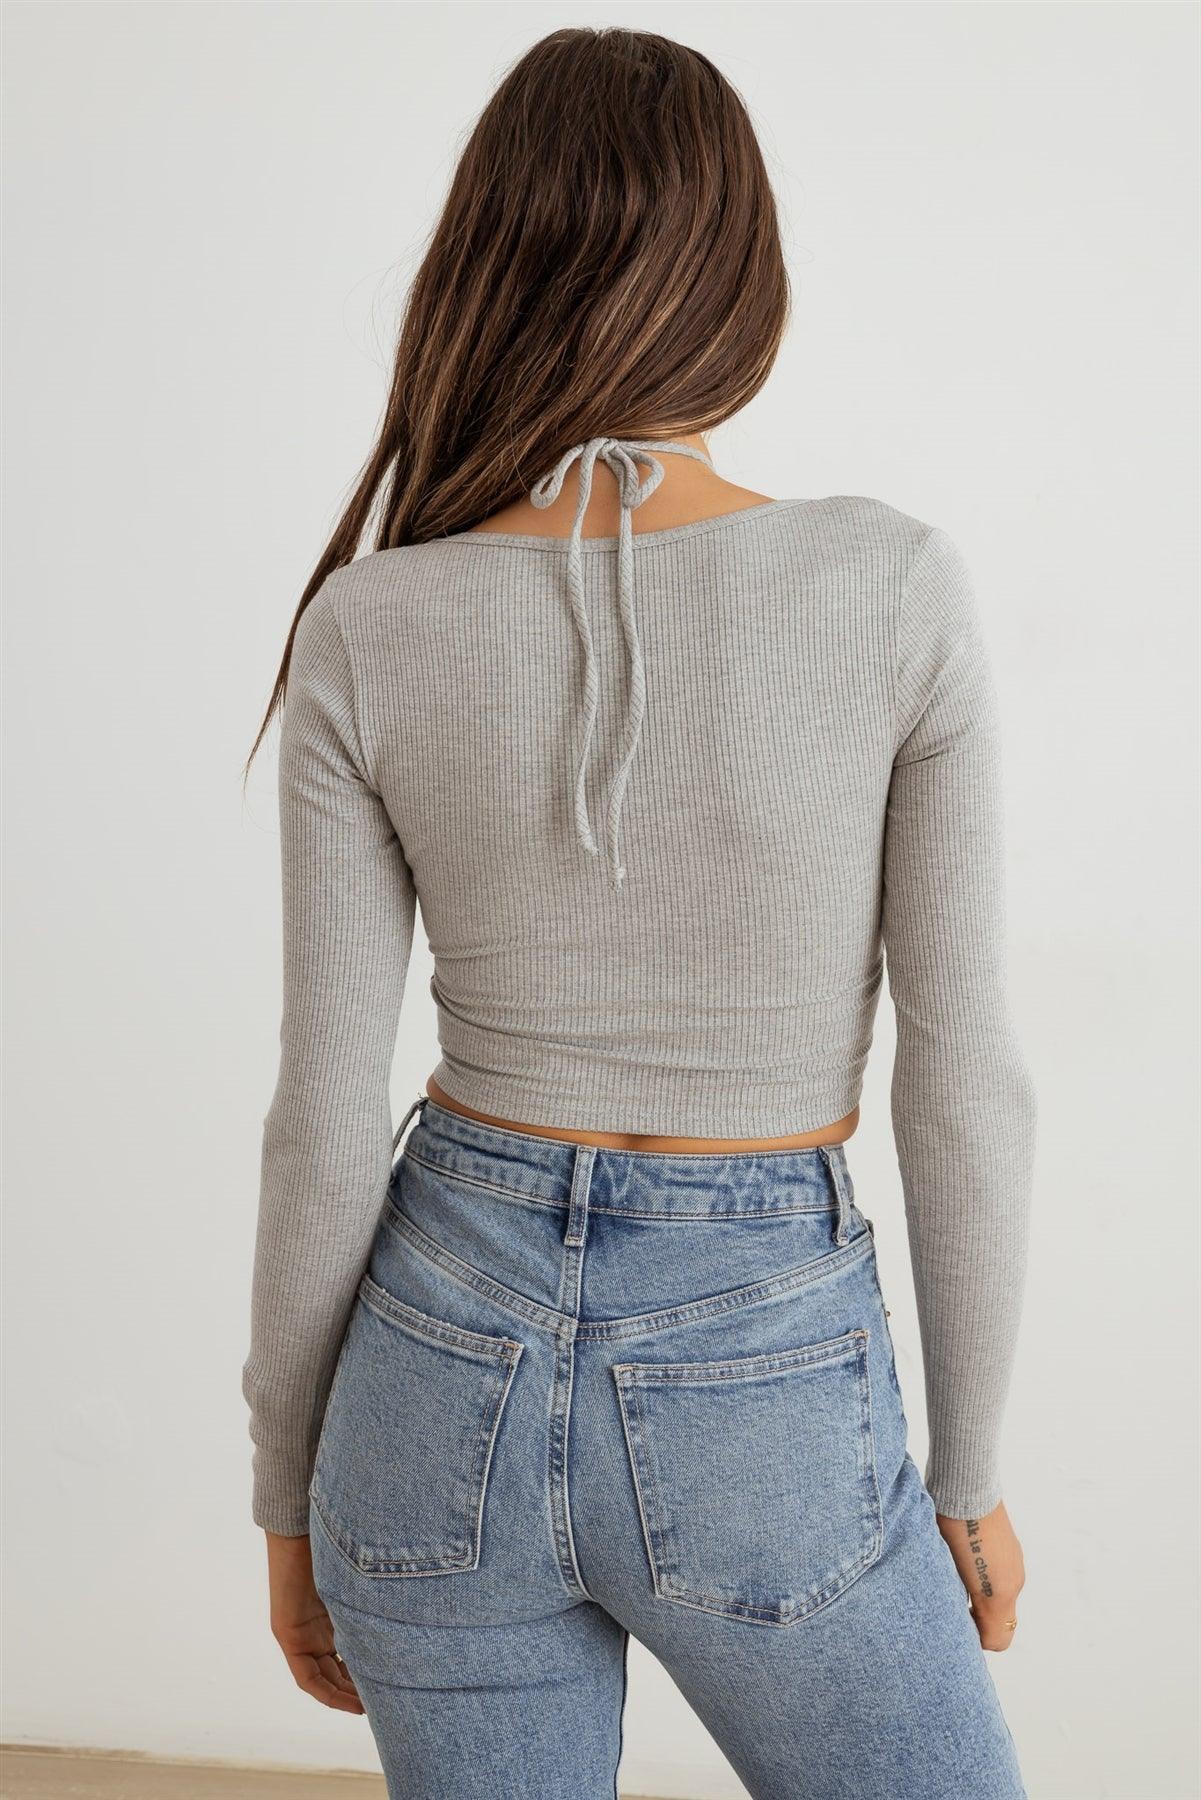 Heather Grey Ribbed Bustier Cut-Out Long Sleeve Crop Top /2-2-2